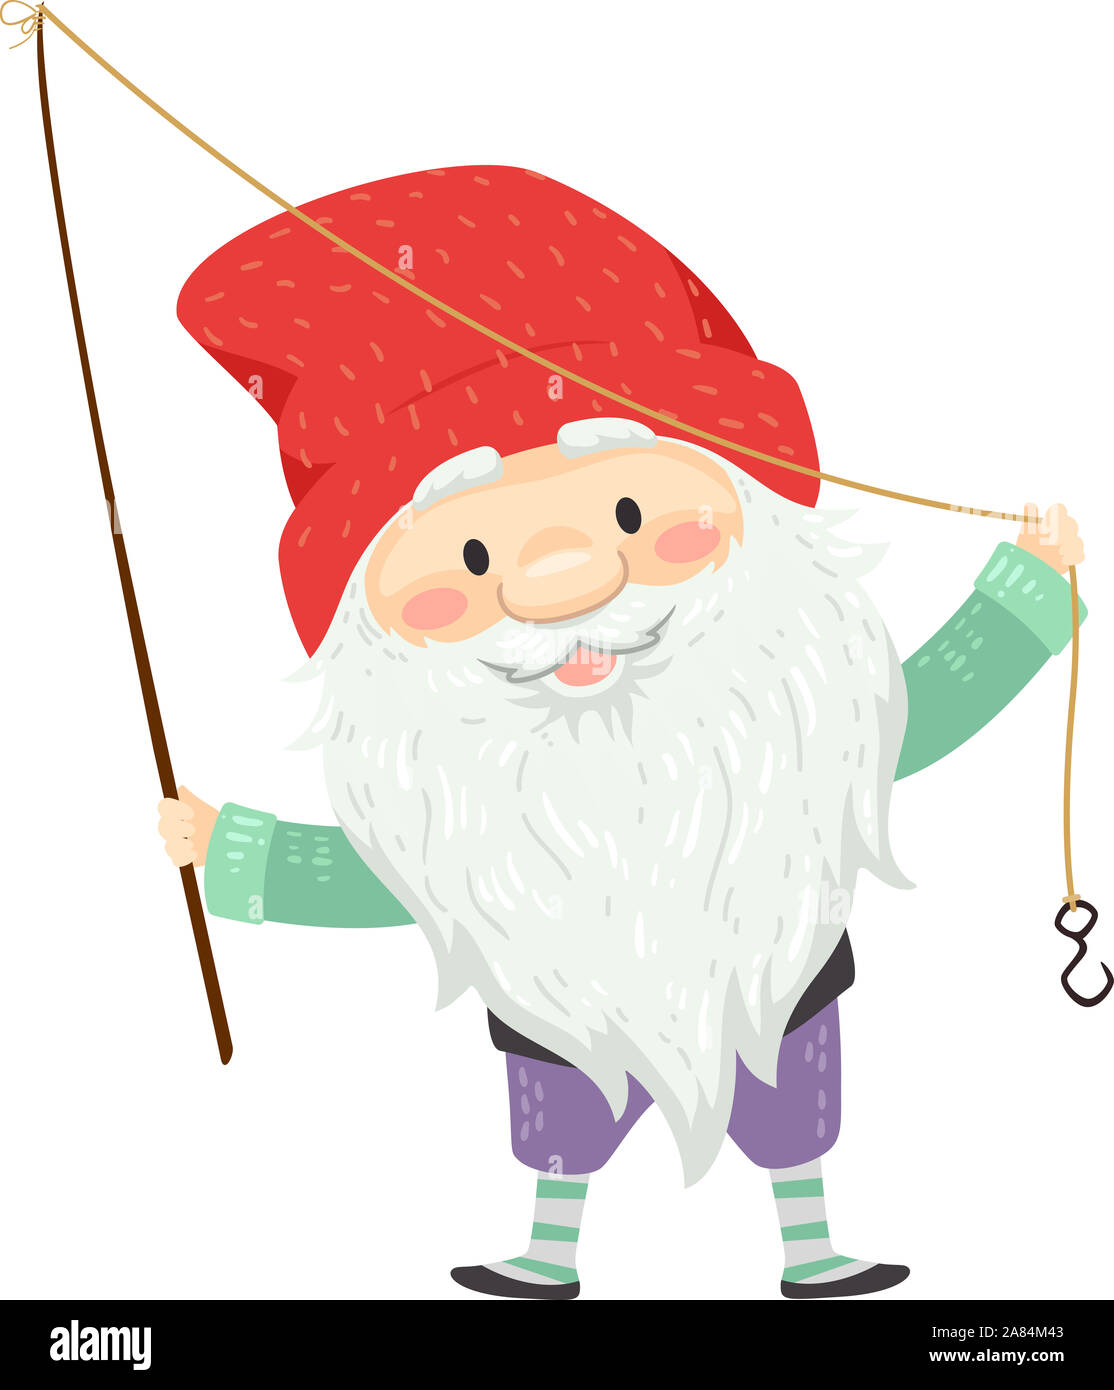 Illustration of an Icelandic Yule Lad with Long White Beard and ...